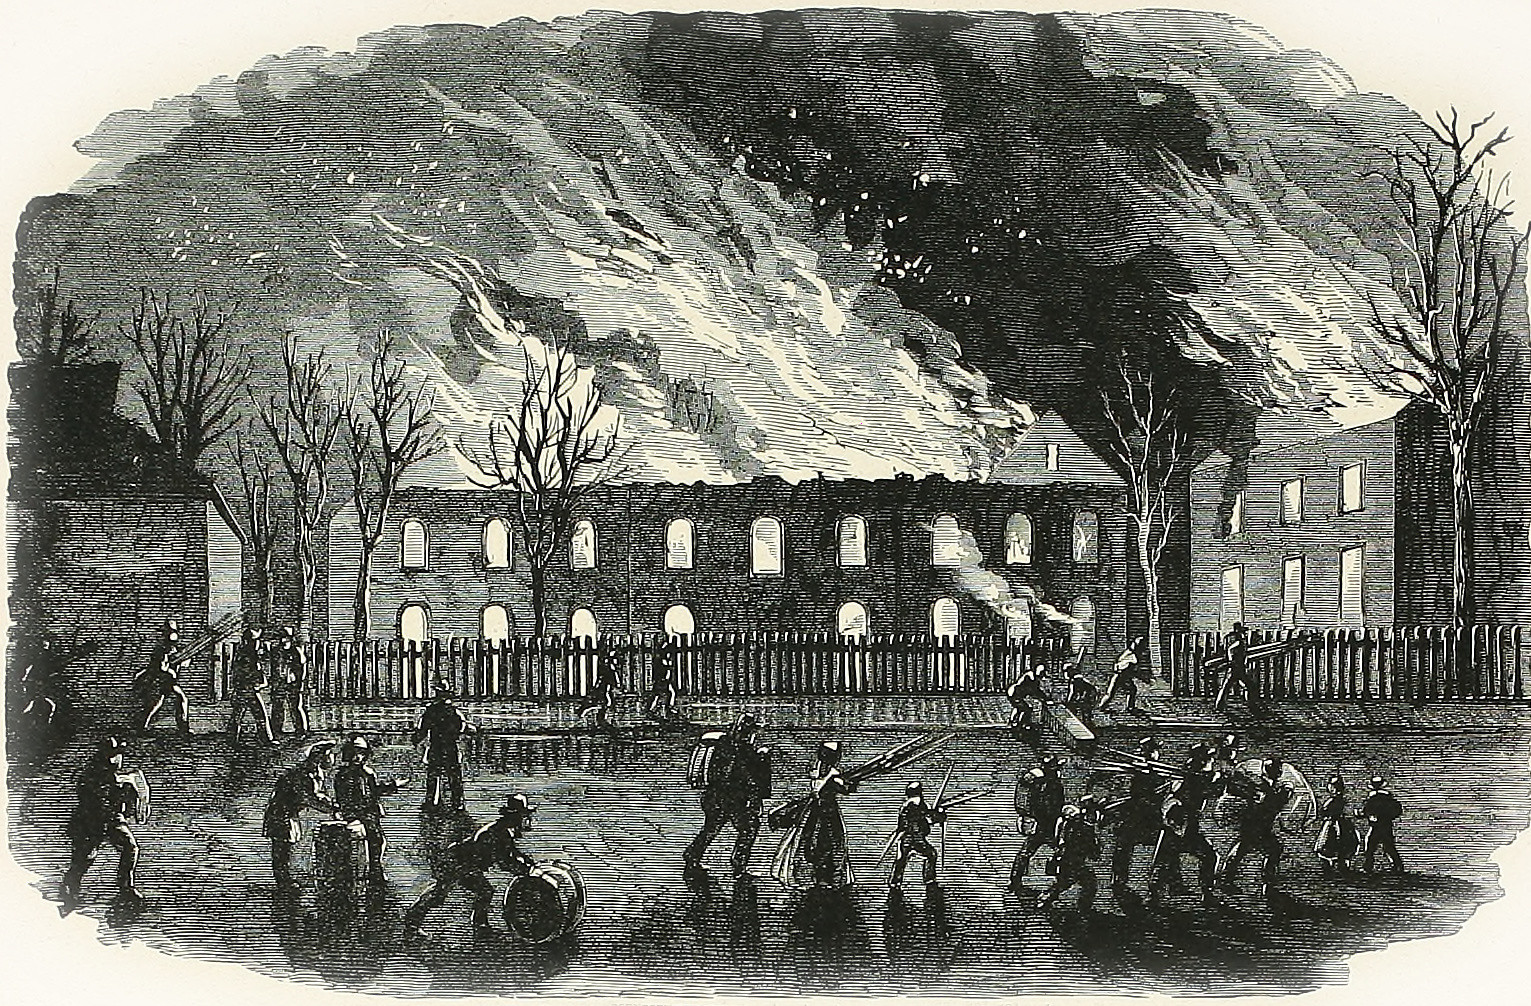 Burning of the United States Arsenal at Harper's Ferry, 10 P.M., April 18, 1861